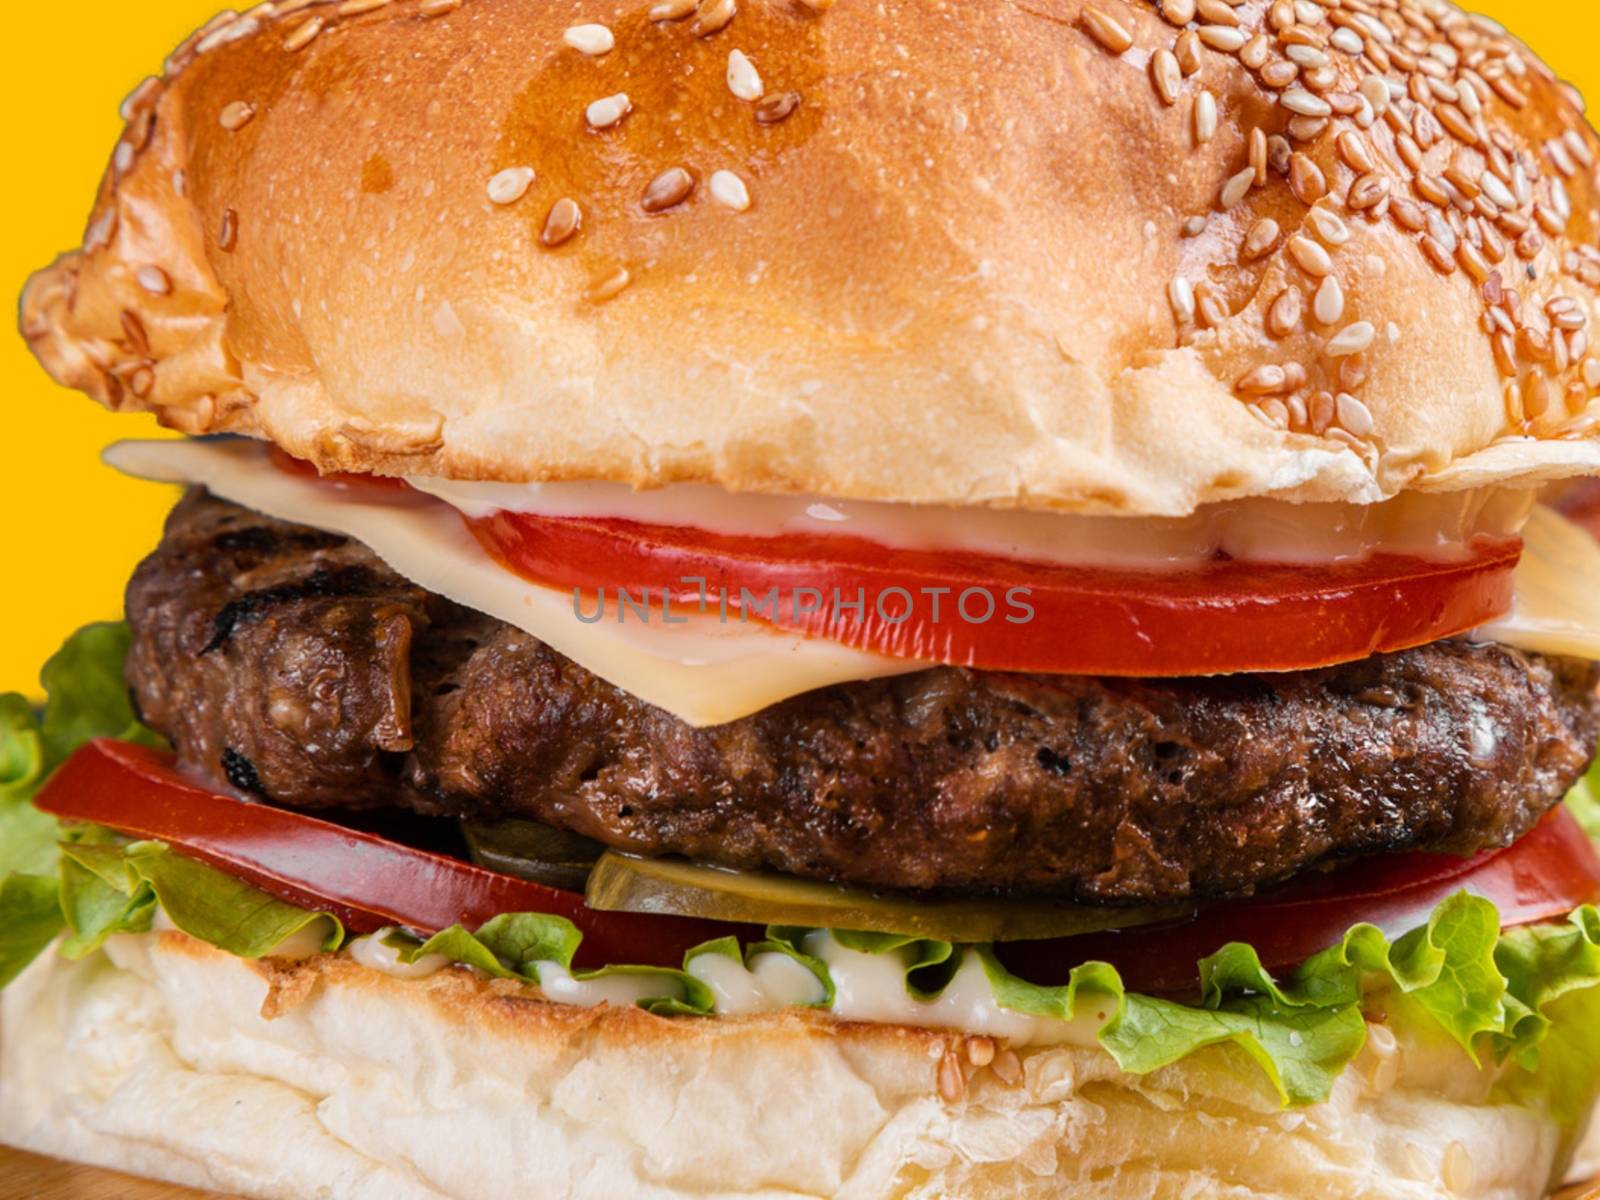 A close up of a delicious hamburger with beef, cheese, and vegetables.